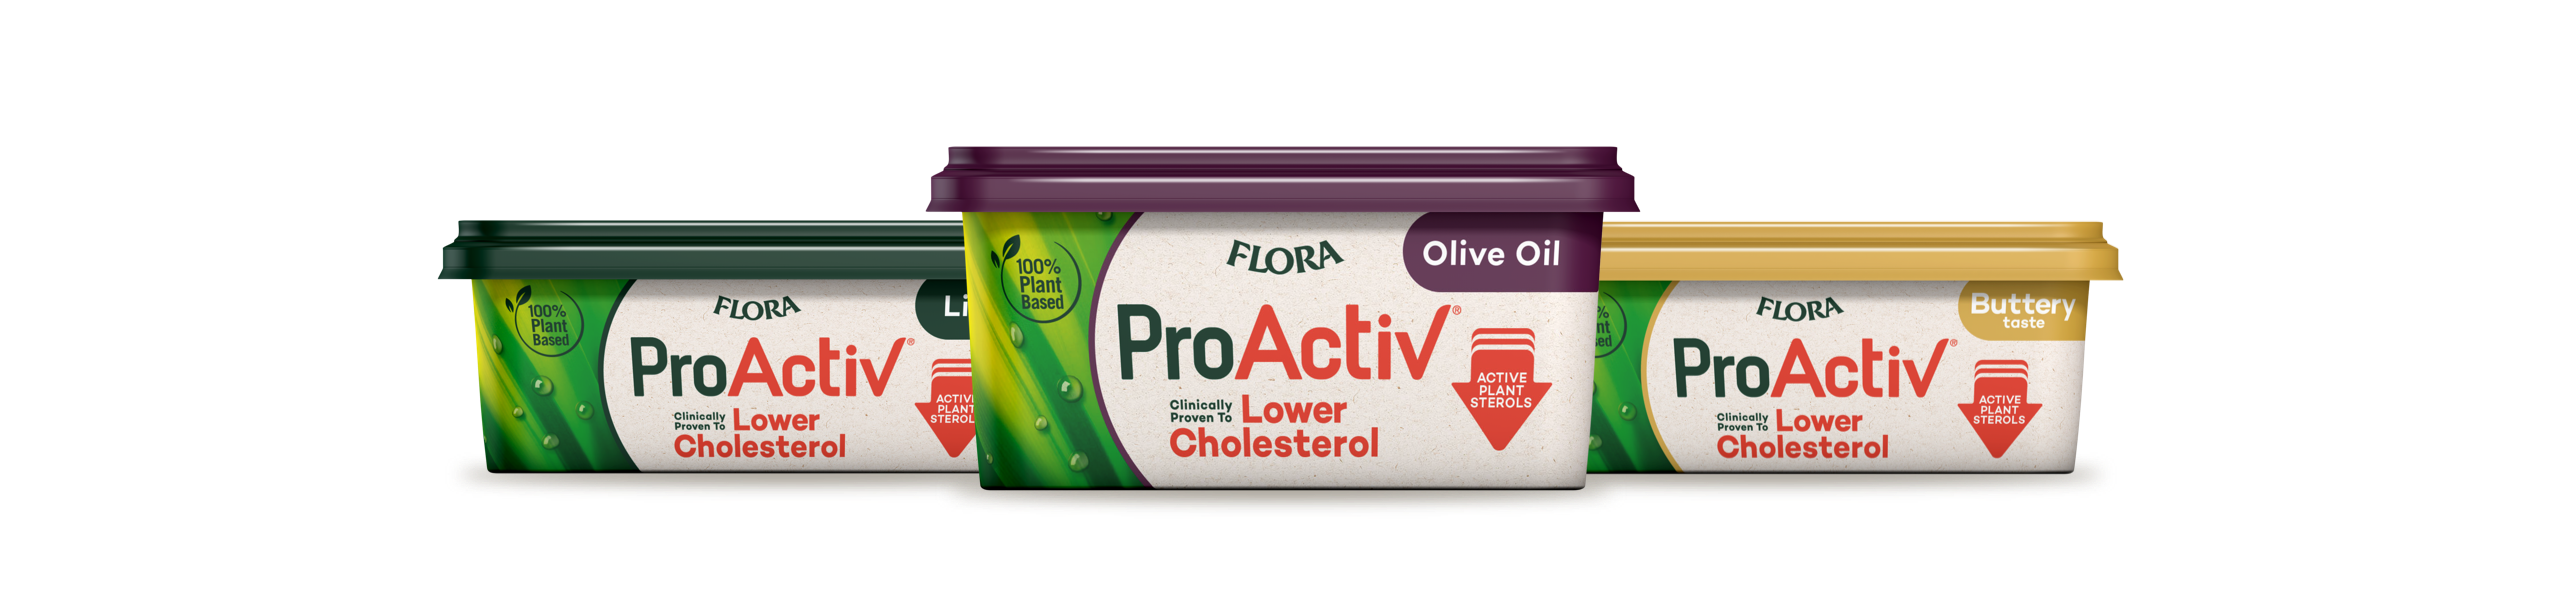 Flora ProActiv products